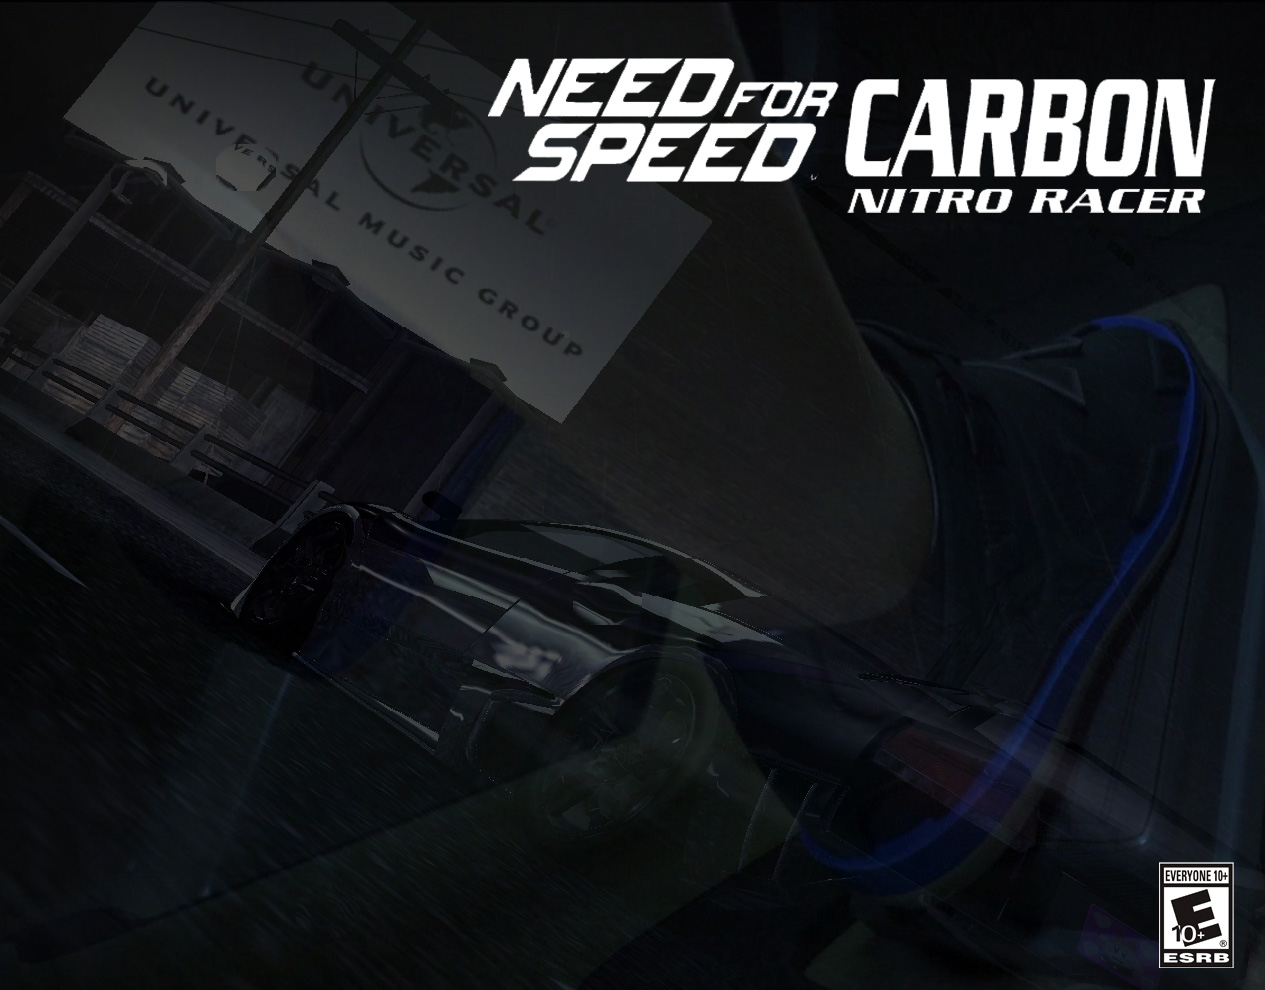 Need for Speed Carbon Nitro Racer wallpaper by Rainbow-Dash-Rockz